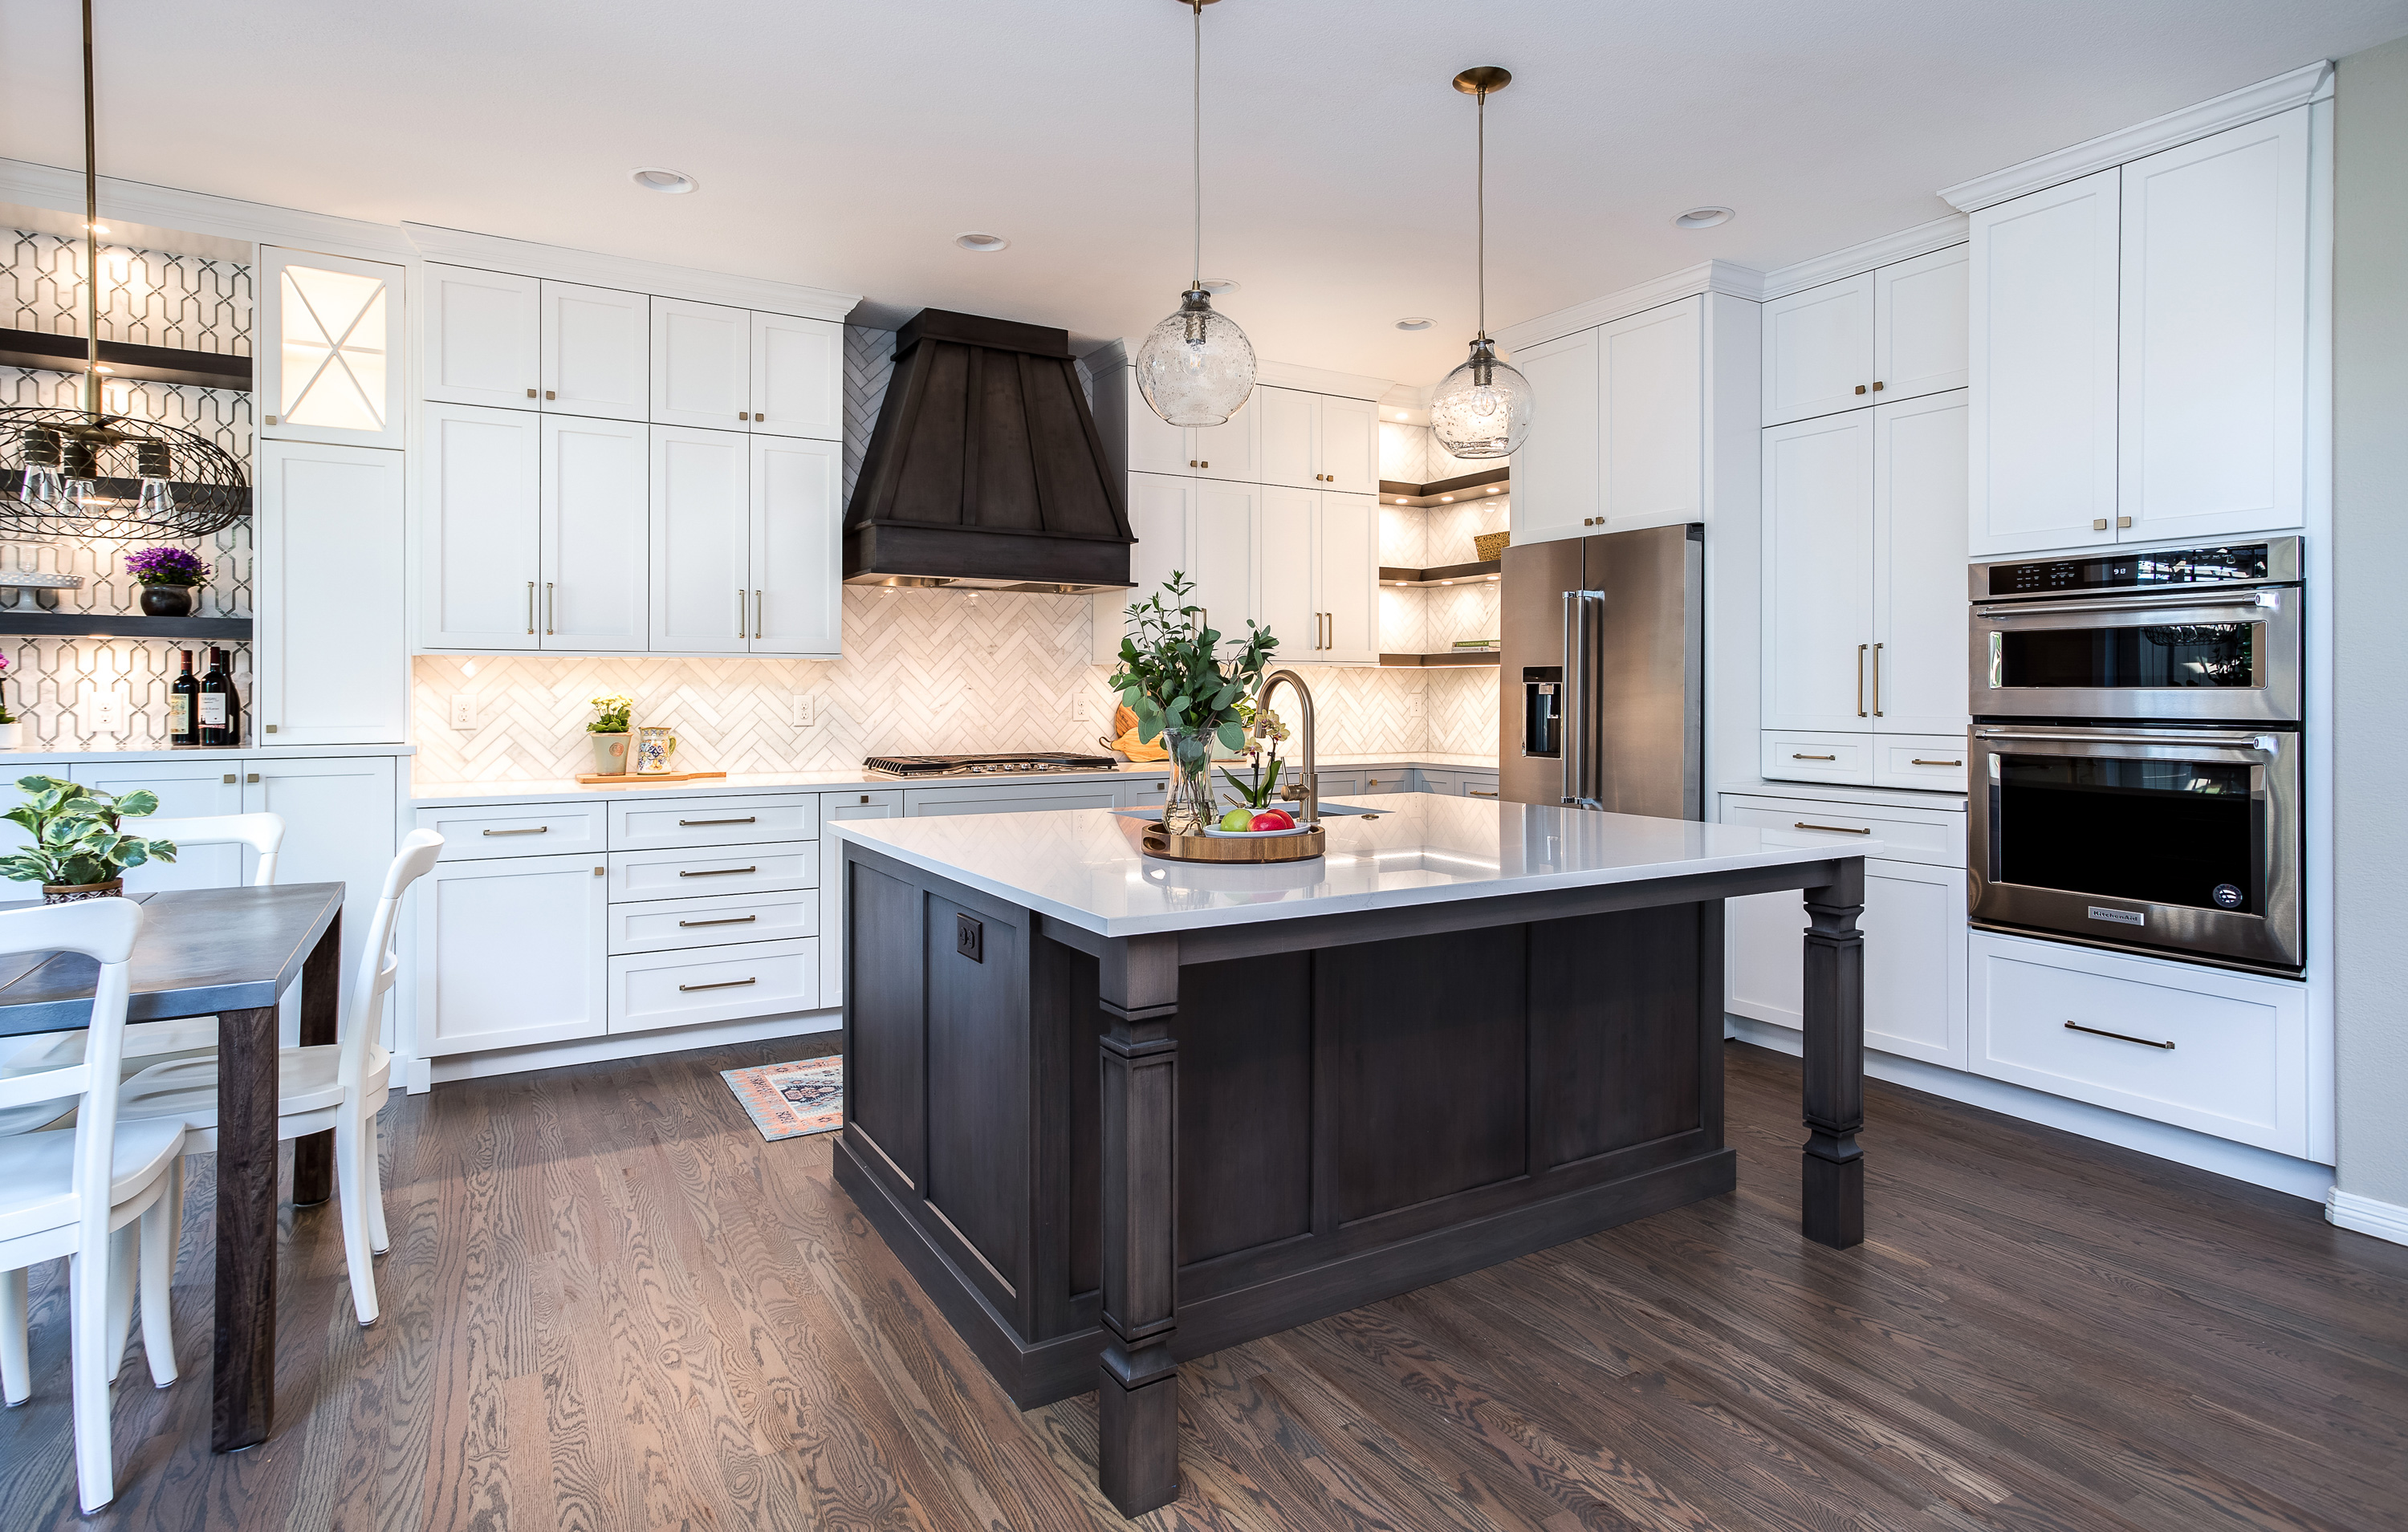 The Big Remodeling Question in Denver is Painted Cabinets or Stained?